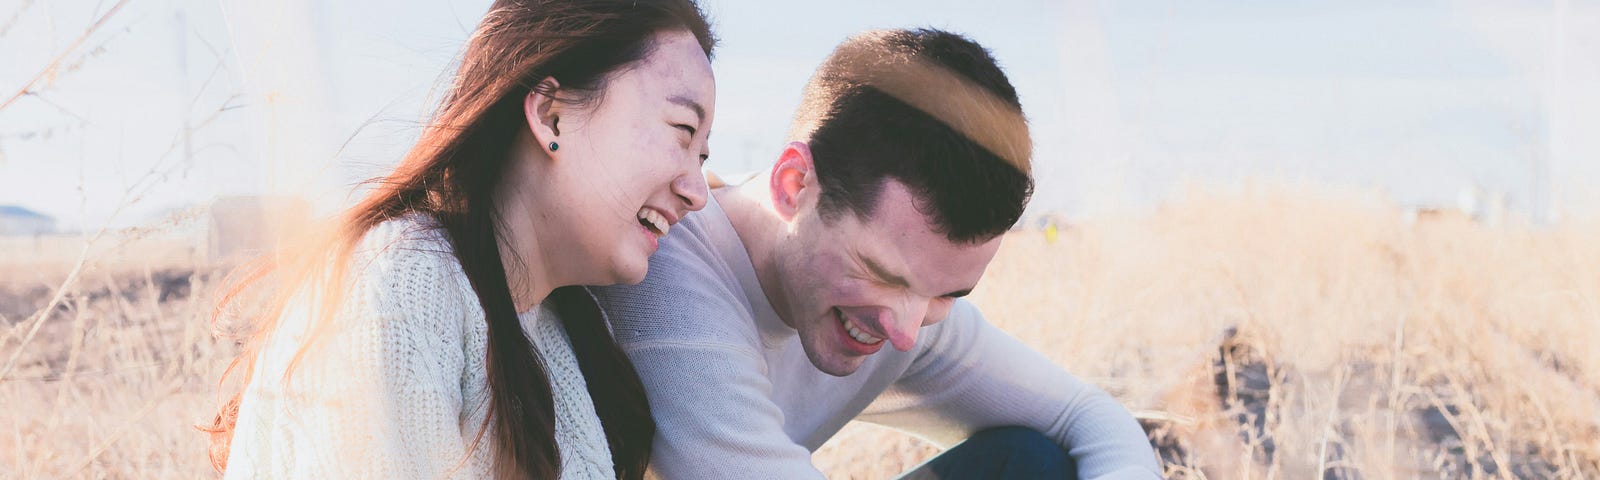 A man and woman sit laughing in a field under clear skies.